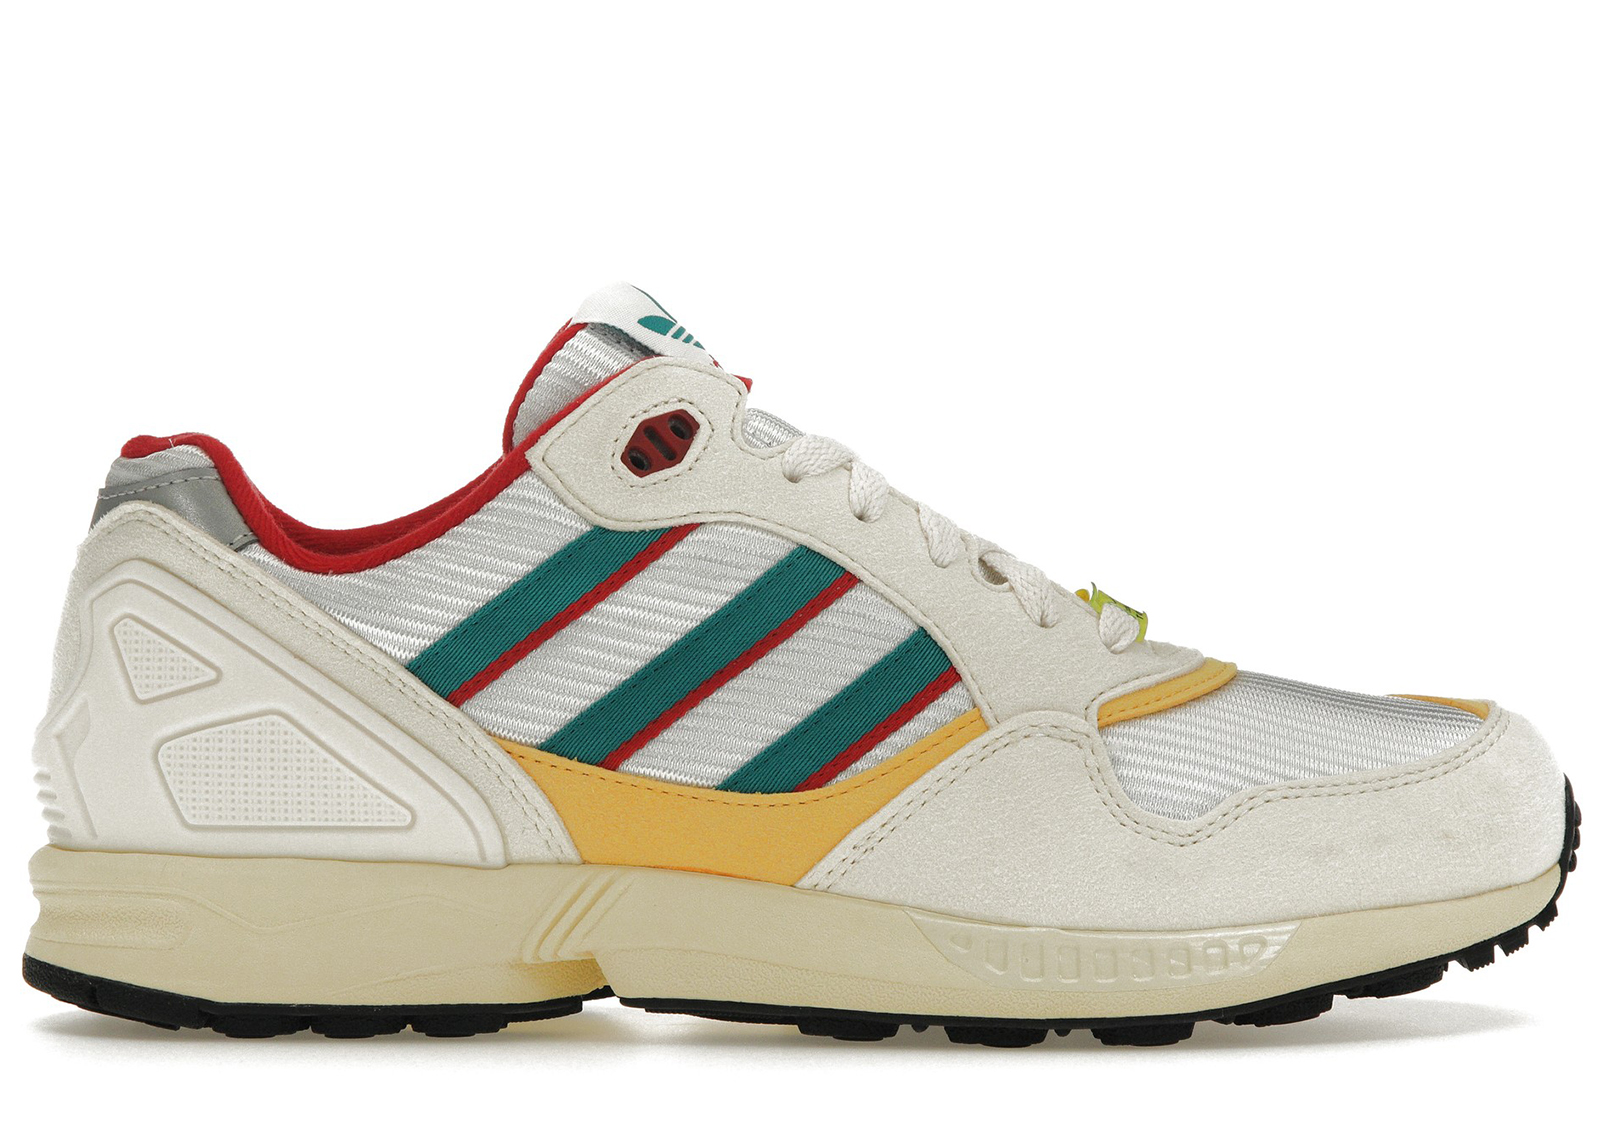 adidas ZX 6000 30 Years of Torsion Men's - FU8405 - US